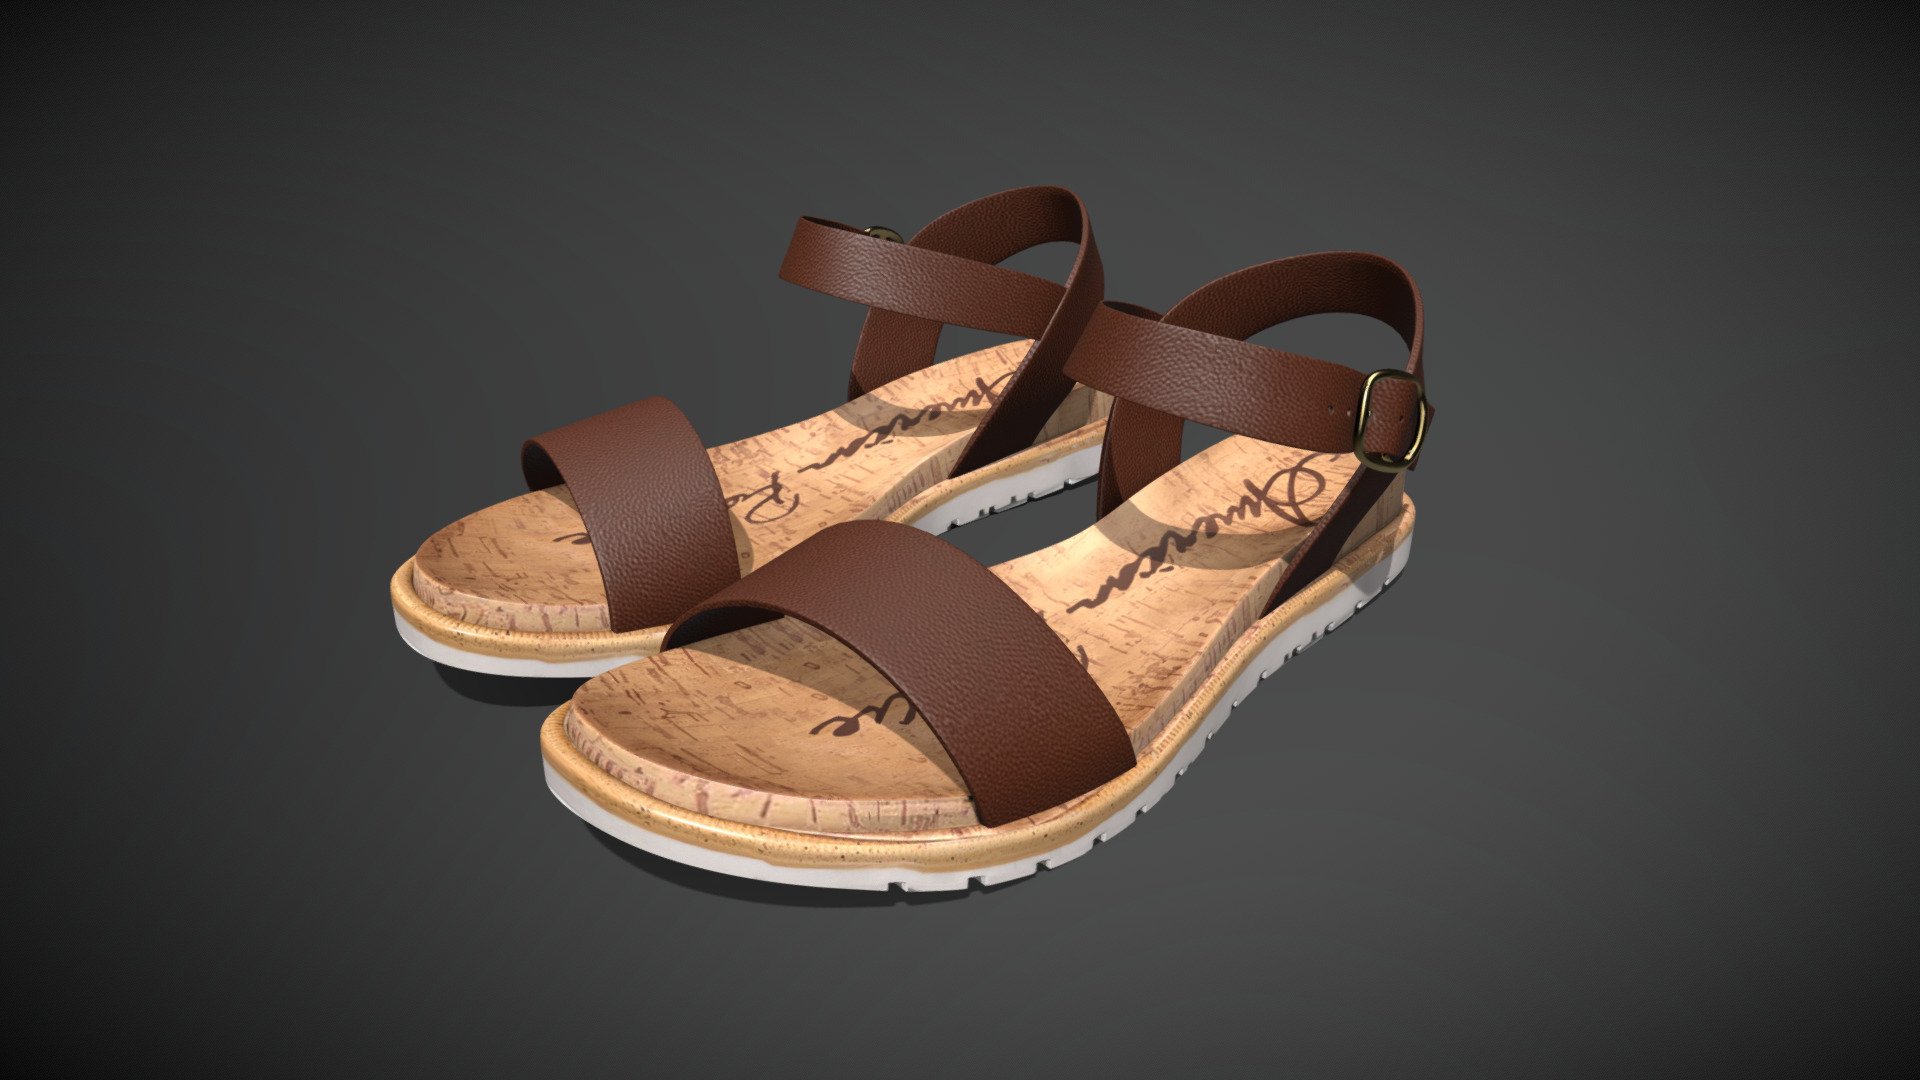 Hope you like this sandle 3d model. 
Created this in 3ds max and used photoshop, substance painter for texturing - Sandals - 3D Shoe Model - 3D model by SyedWaqasMunir 3d model